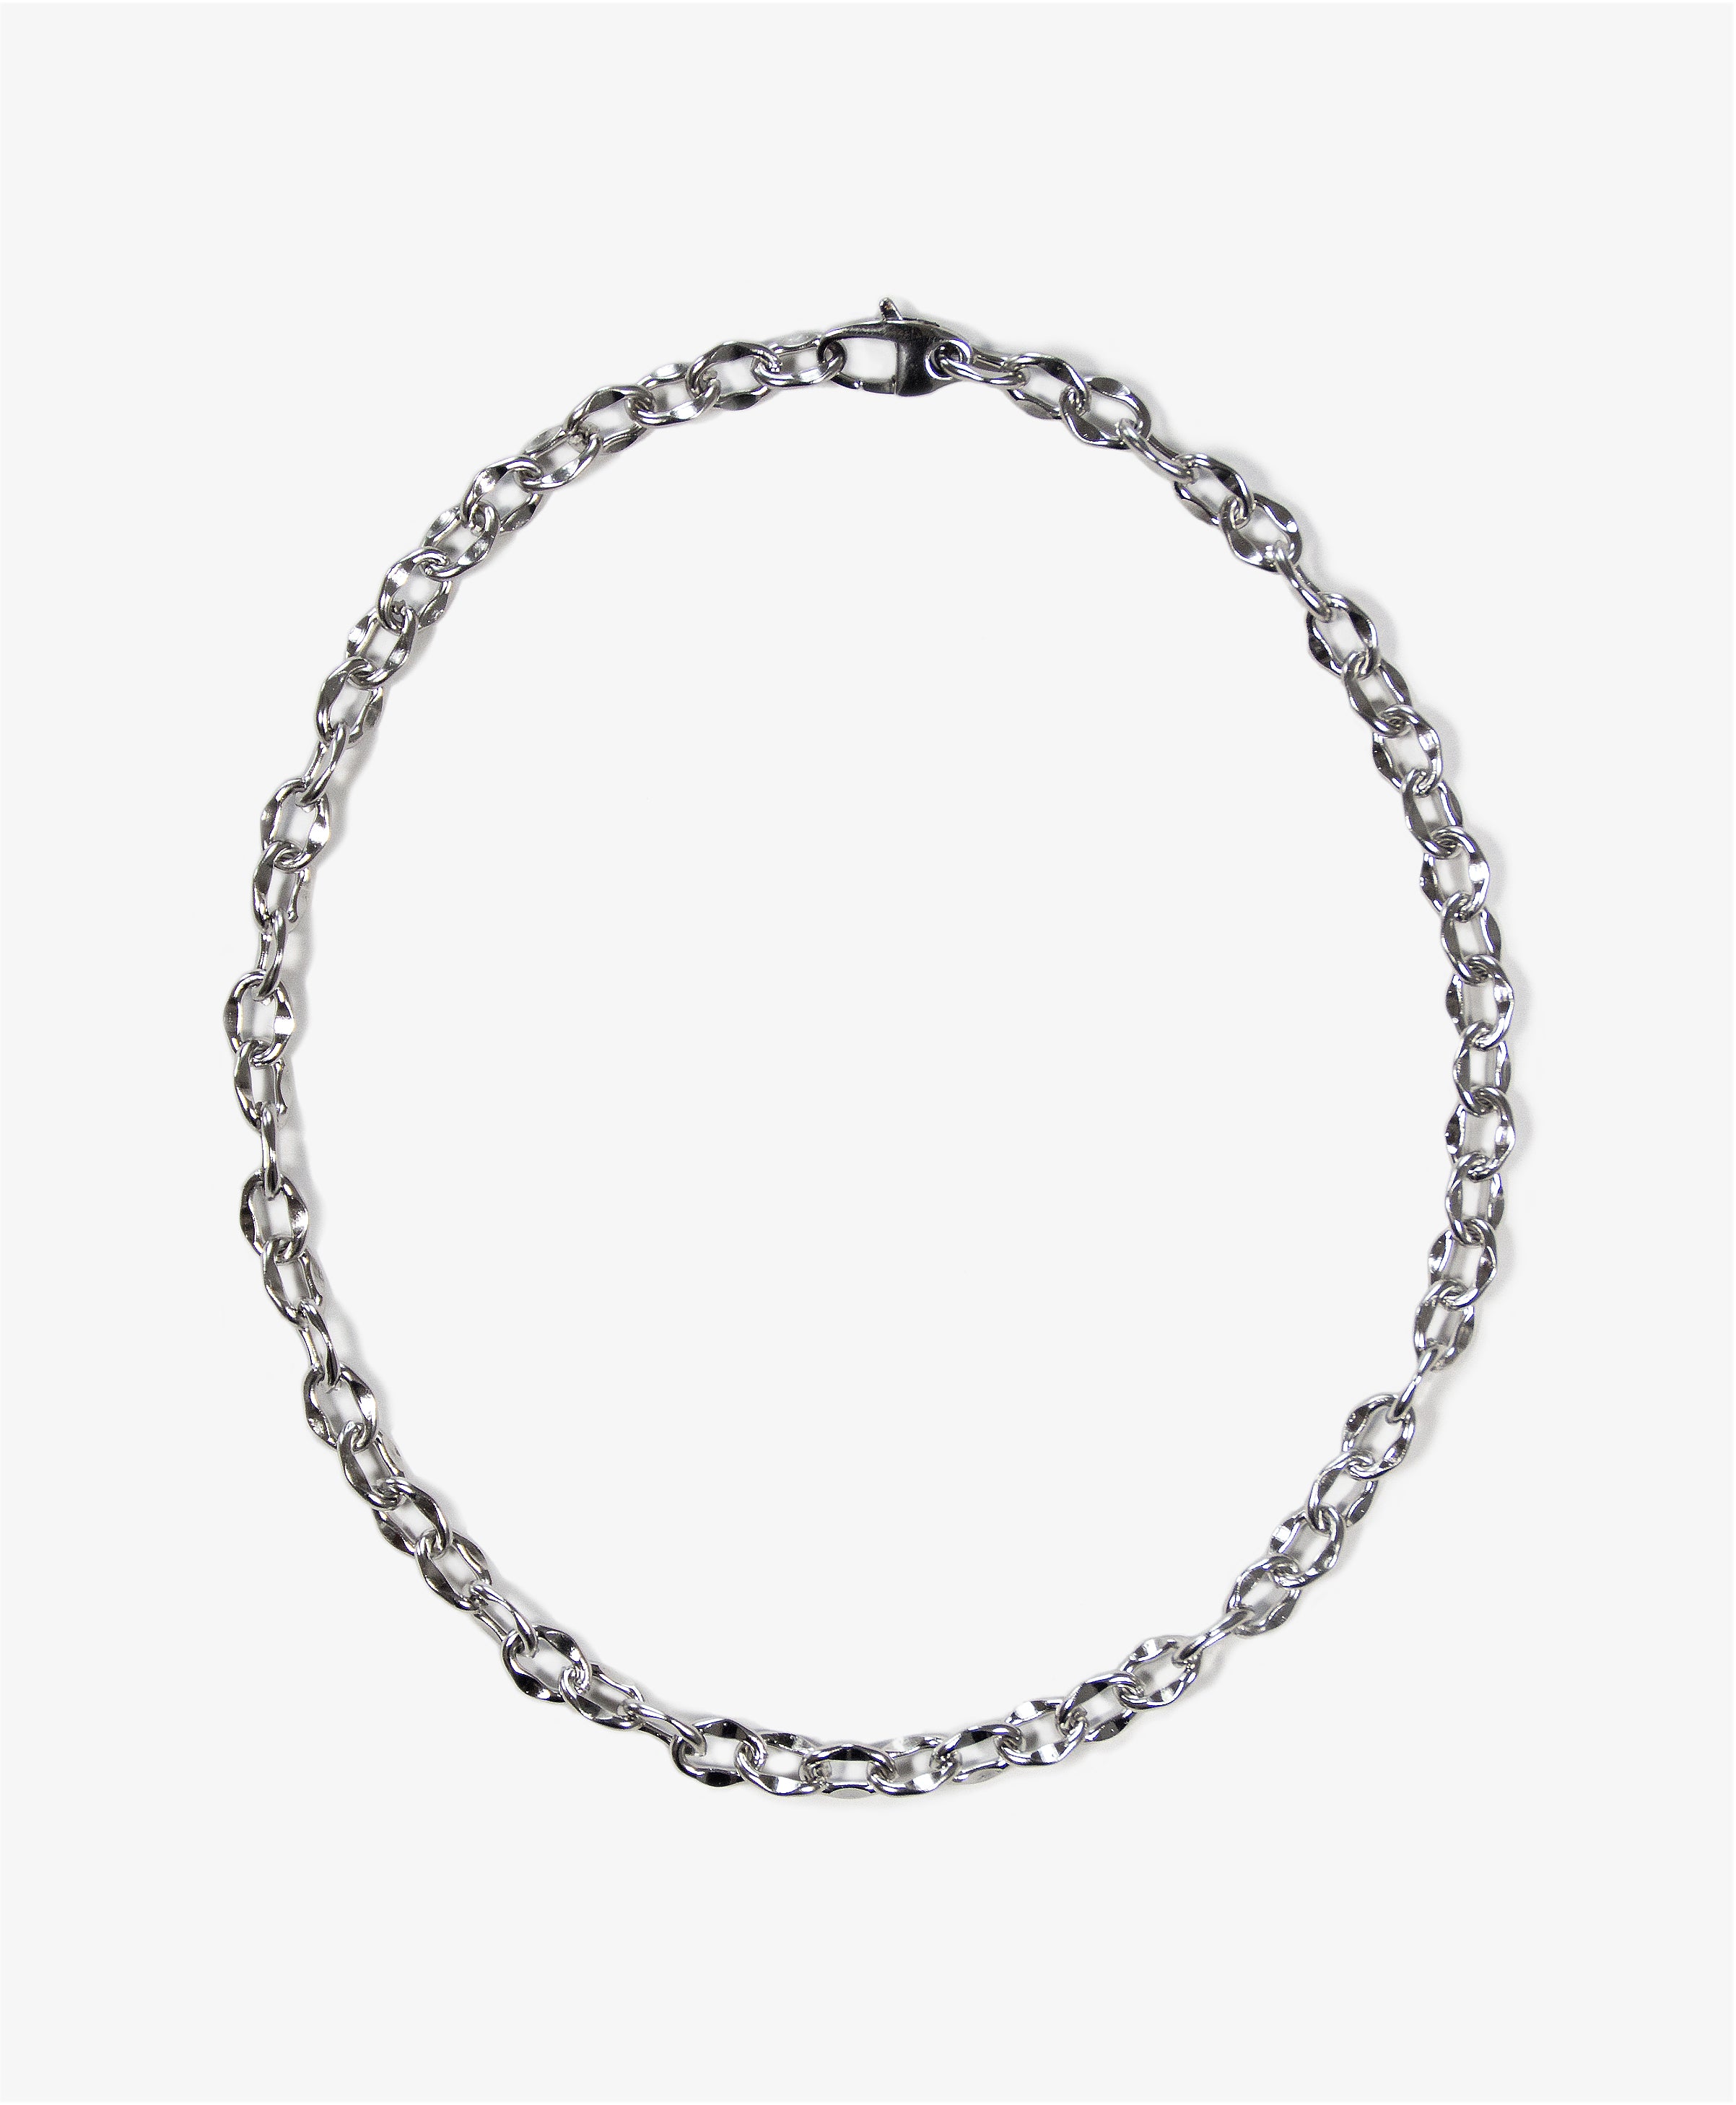 llayers-mens-women-jewelry-silver-stainlesssteel-choker-chain-necklace-unchained-008-Brooklyn-New-York-1